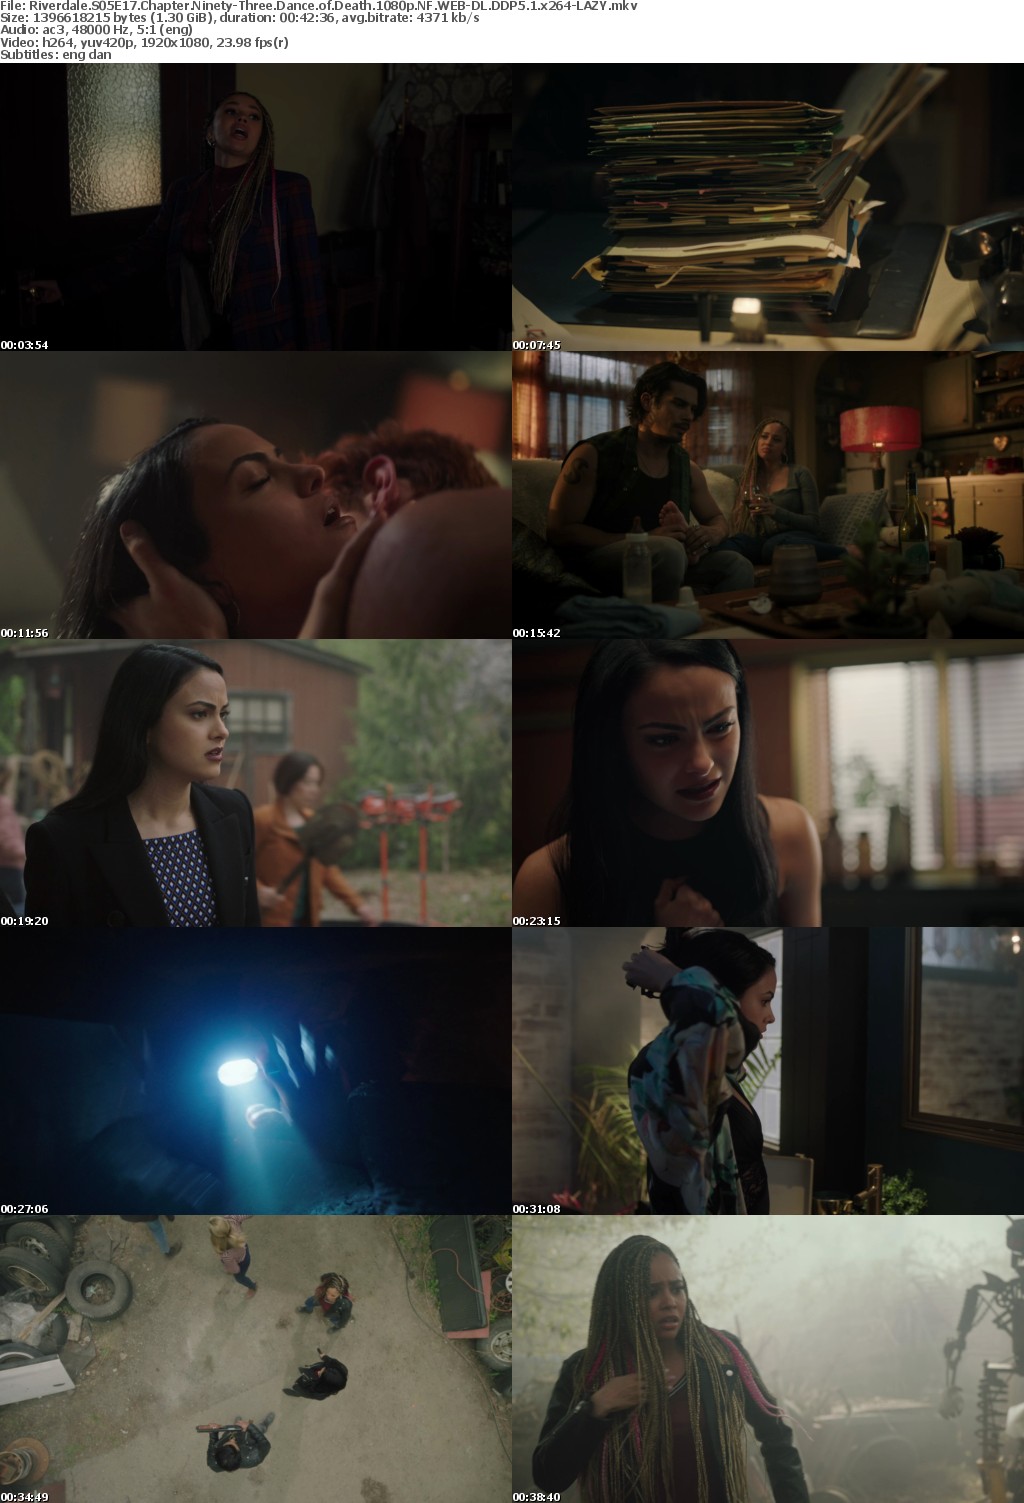 Riverdale US S05E17 Chapter Ninety-Three Dance of Death 1080p NF WEBRip DDP5 1 x264-LAZY